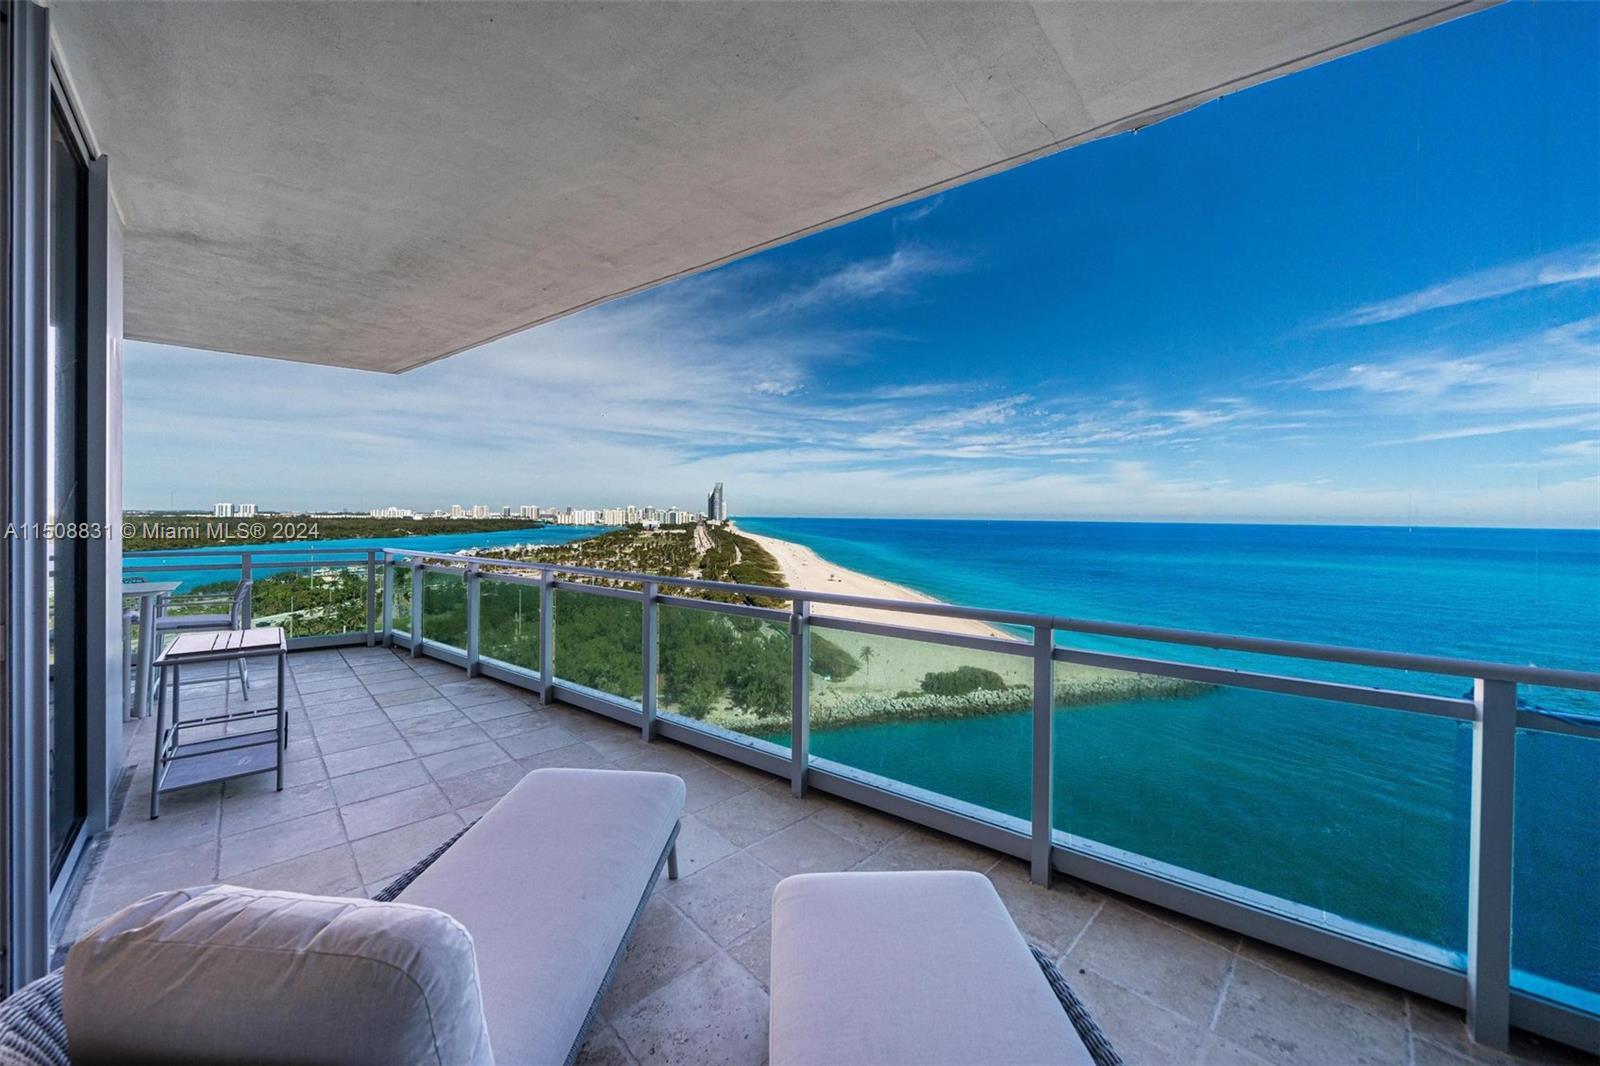 Photo of 10295 E Collins Ave #1509 in Bal Harbour, FL